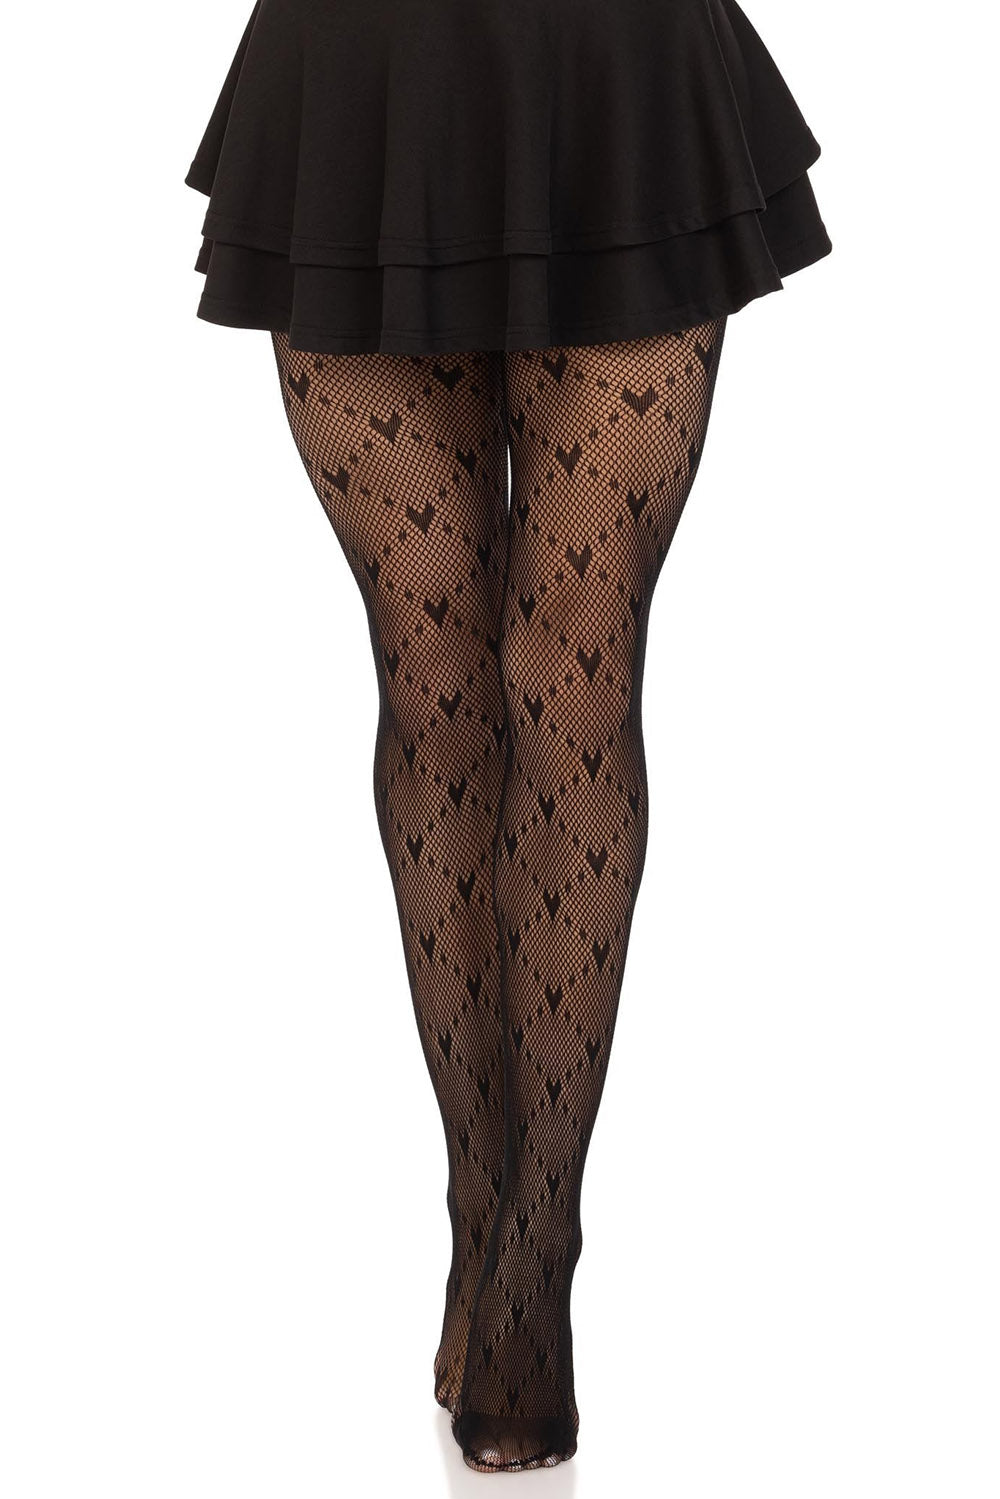 womens gothic high waisted fishnet stockings